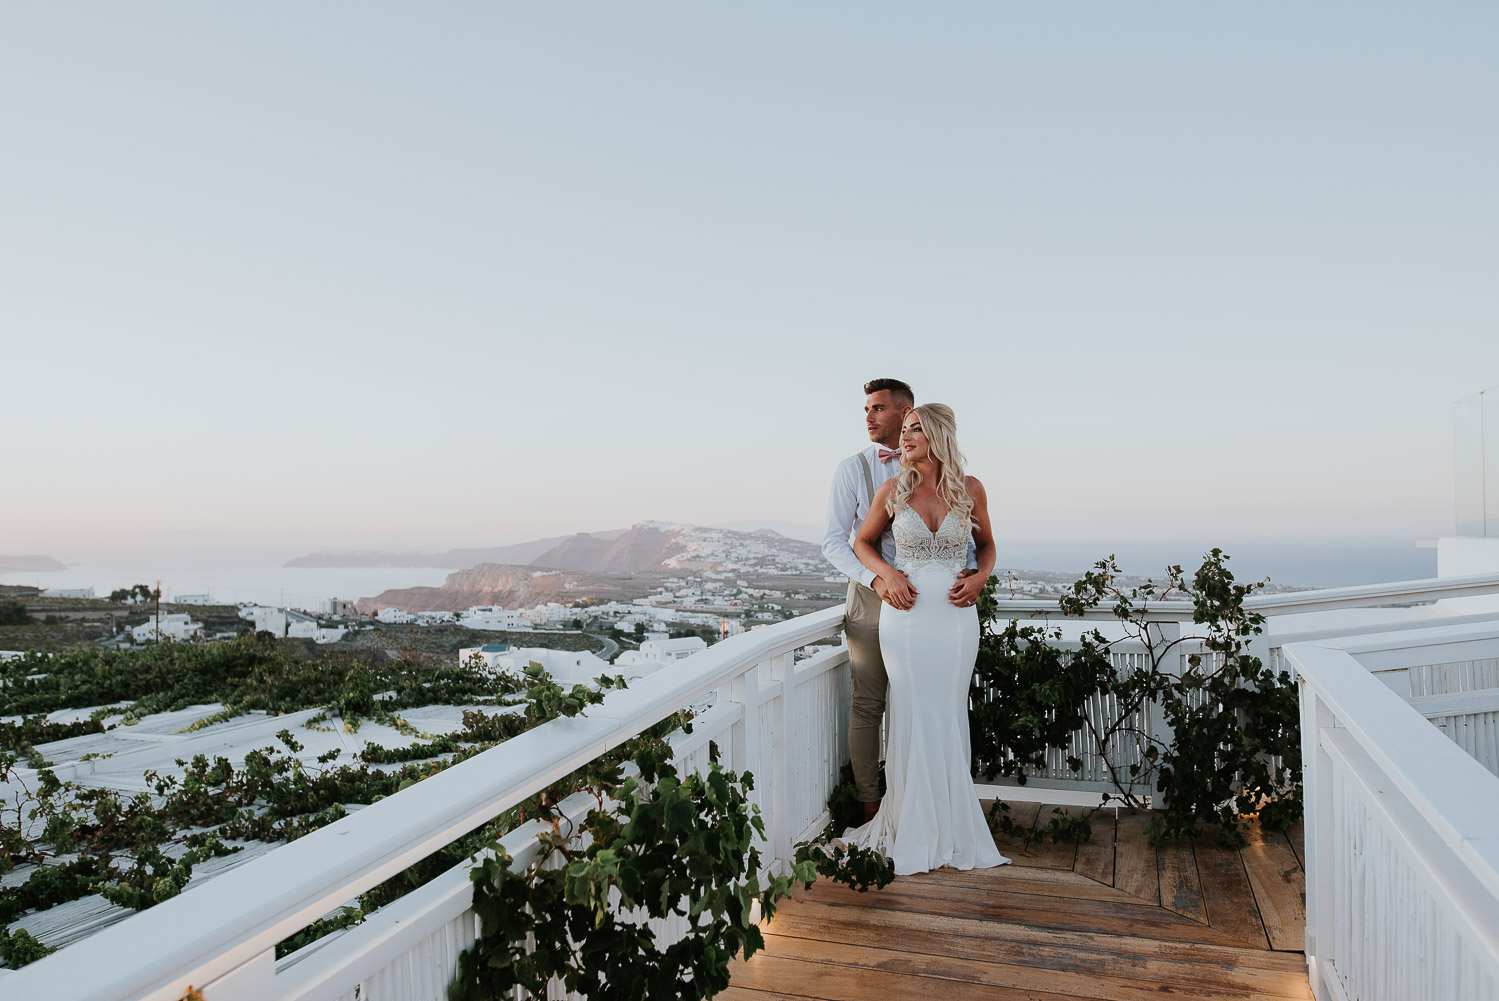 Wedding photographer Santorini: bride and groom on the bridge surrounded by vineyards and the caldera in the background by Ben and Vesna.